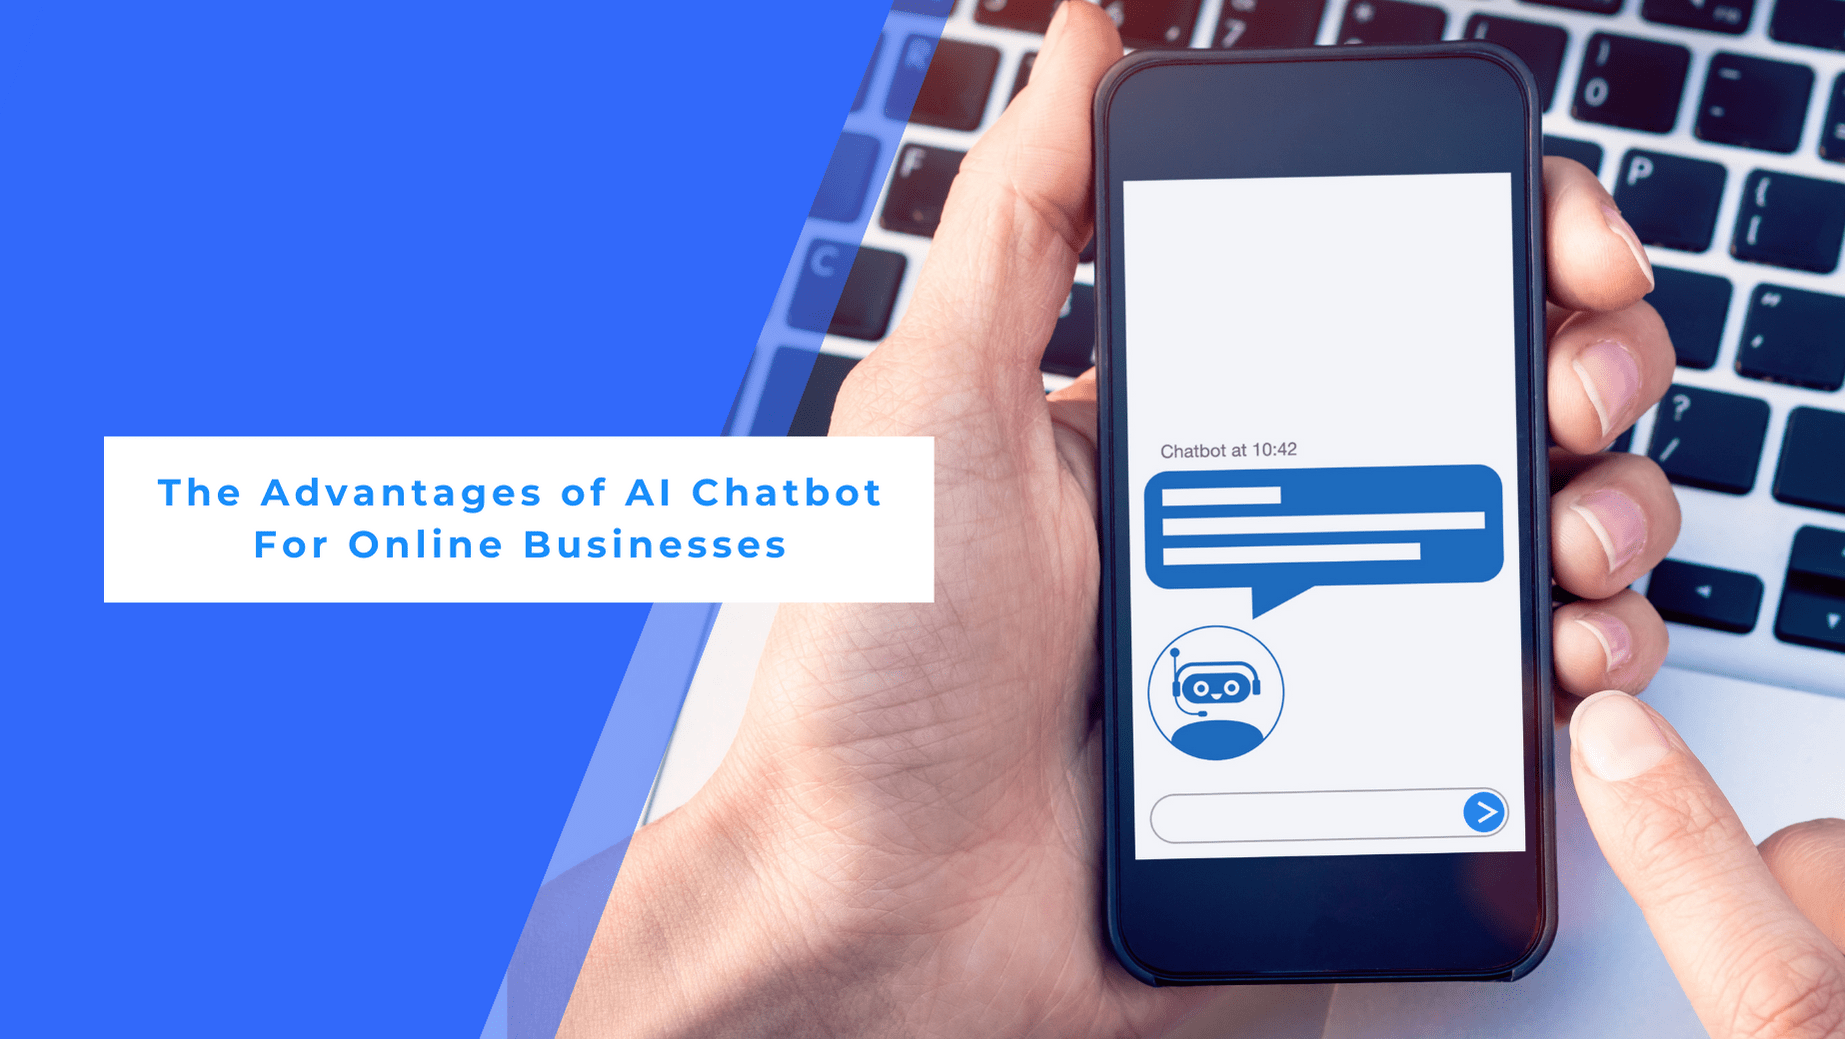 Mobile user on a business website making use of the advantages of AI chatbots